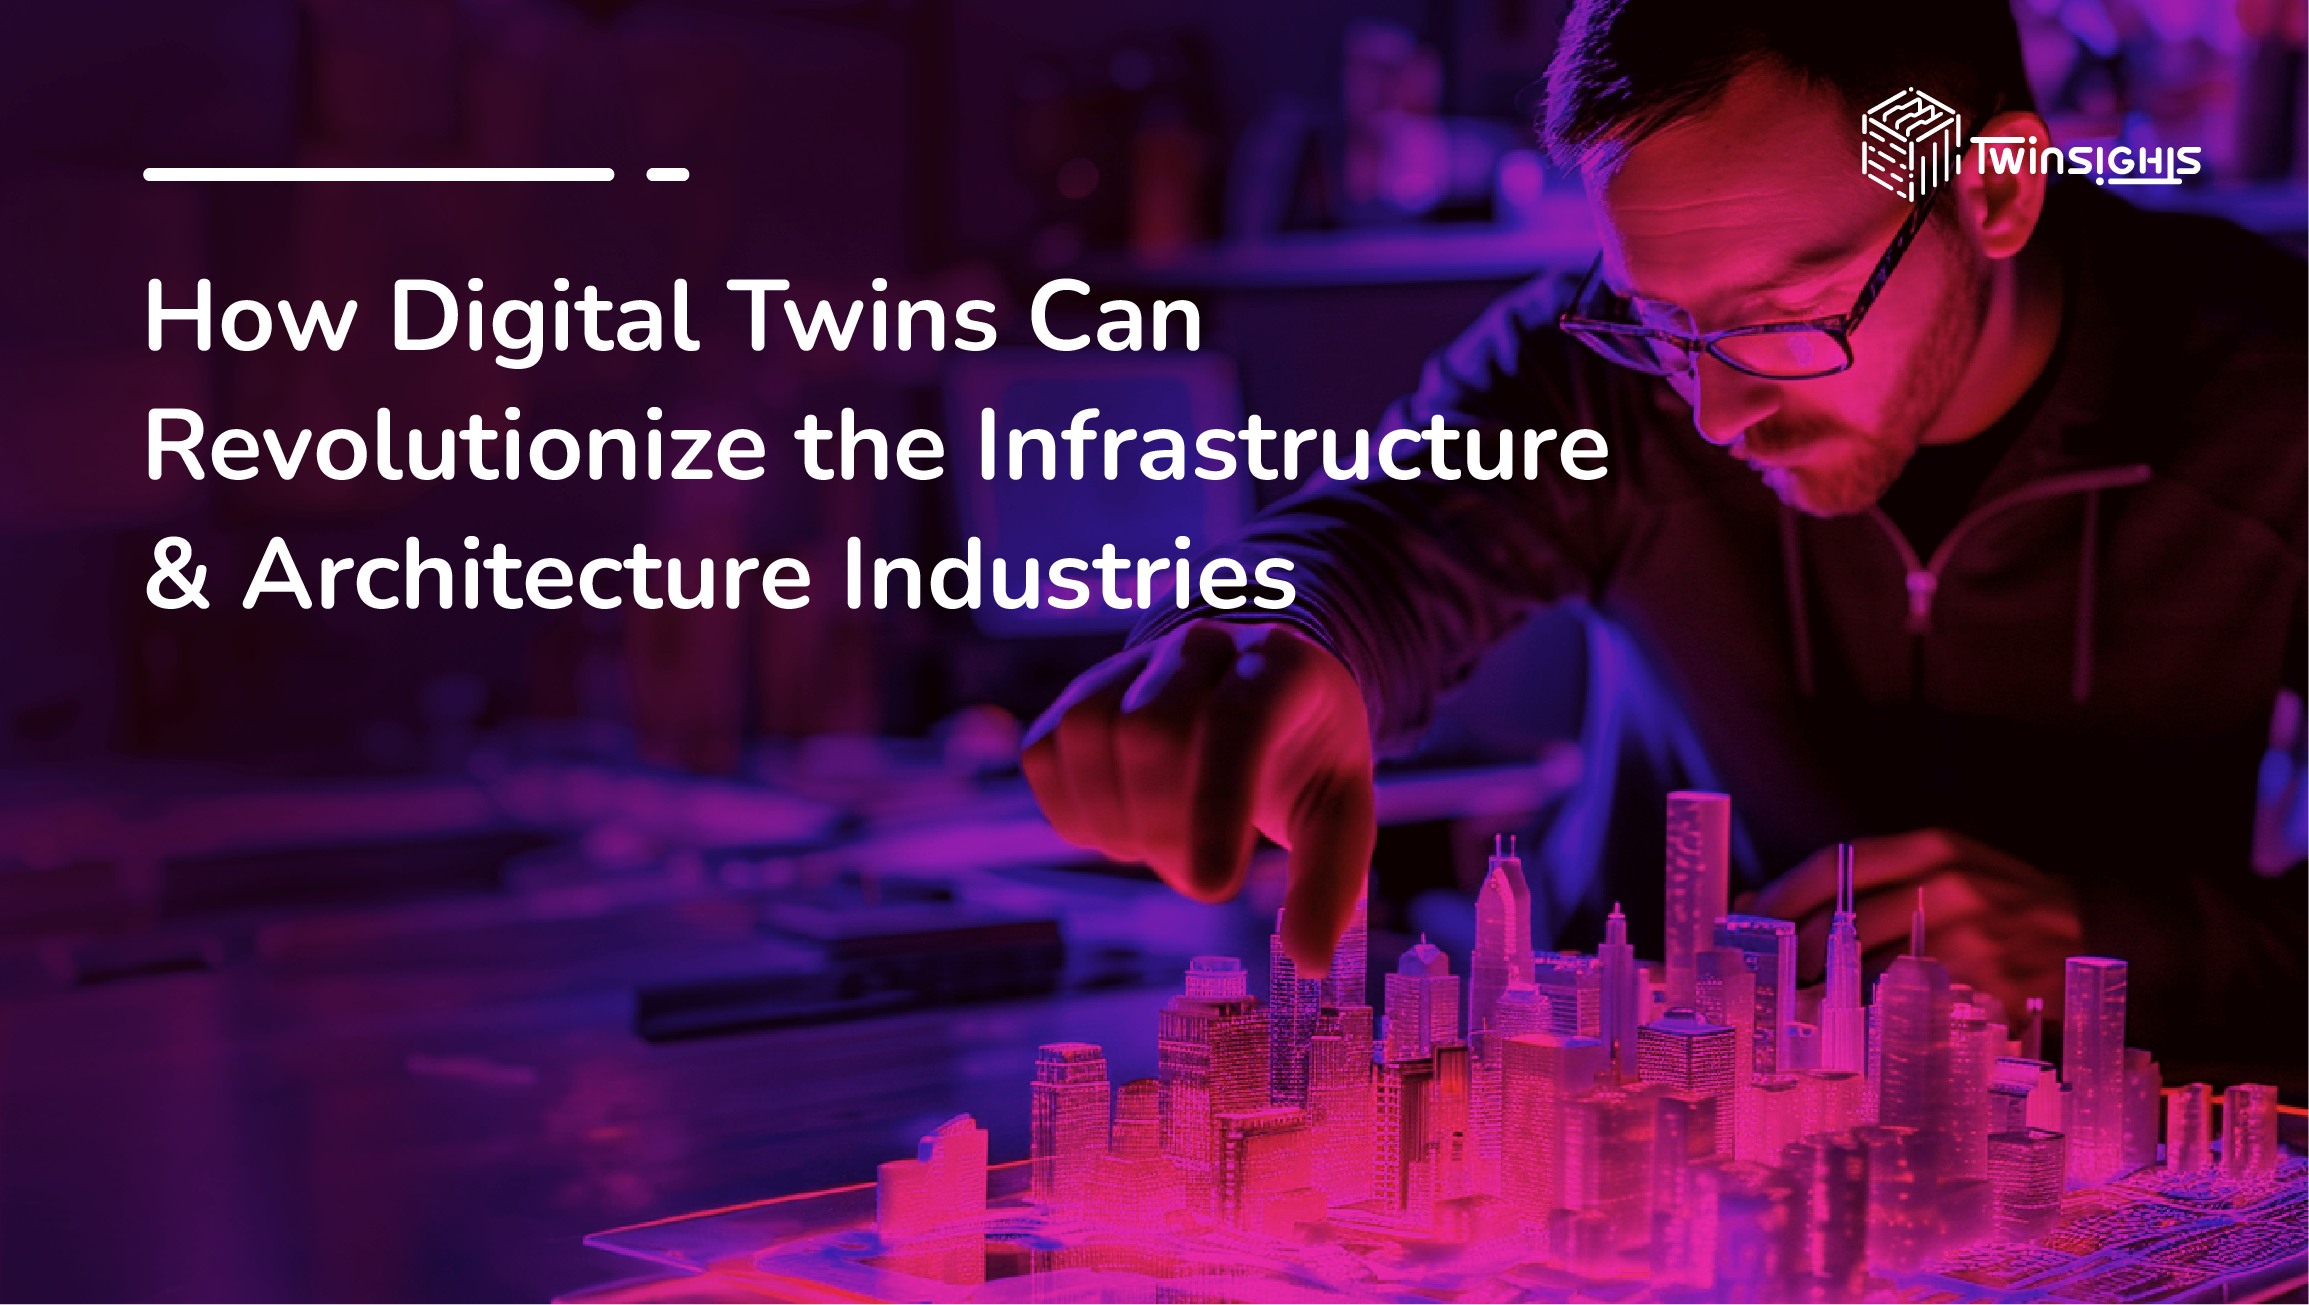 How Digital Twins can revolutionize the Infrastructure and Architecture Industries